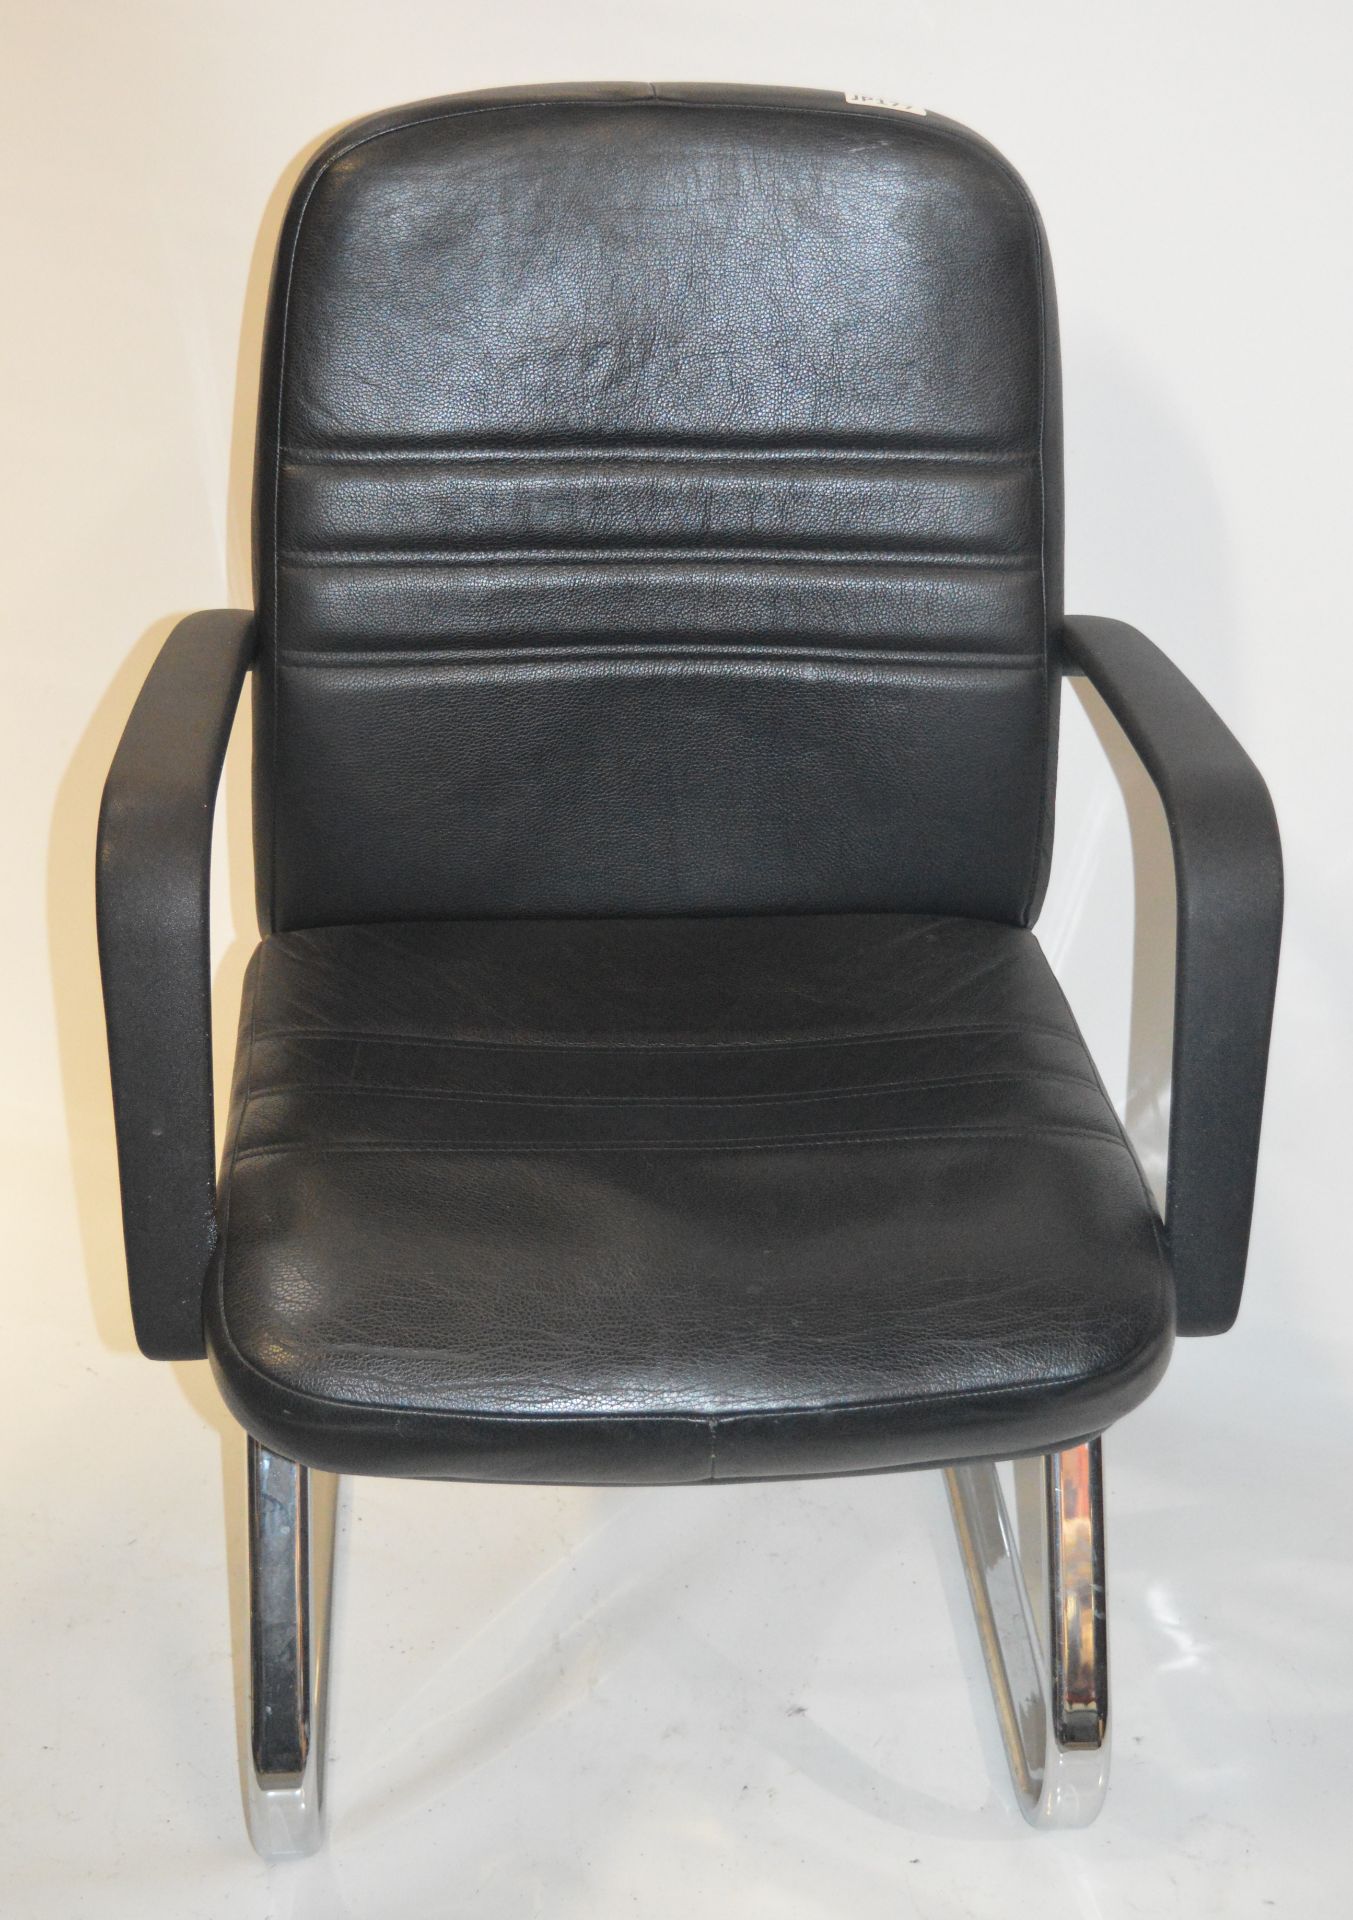 1 x Black Leather Office Chair With Chrome Base - Ref JP177 - Removed From Office Environment - - Image 2 of 4